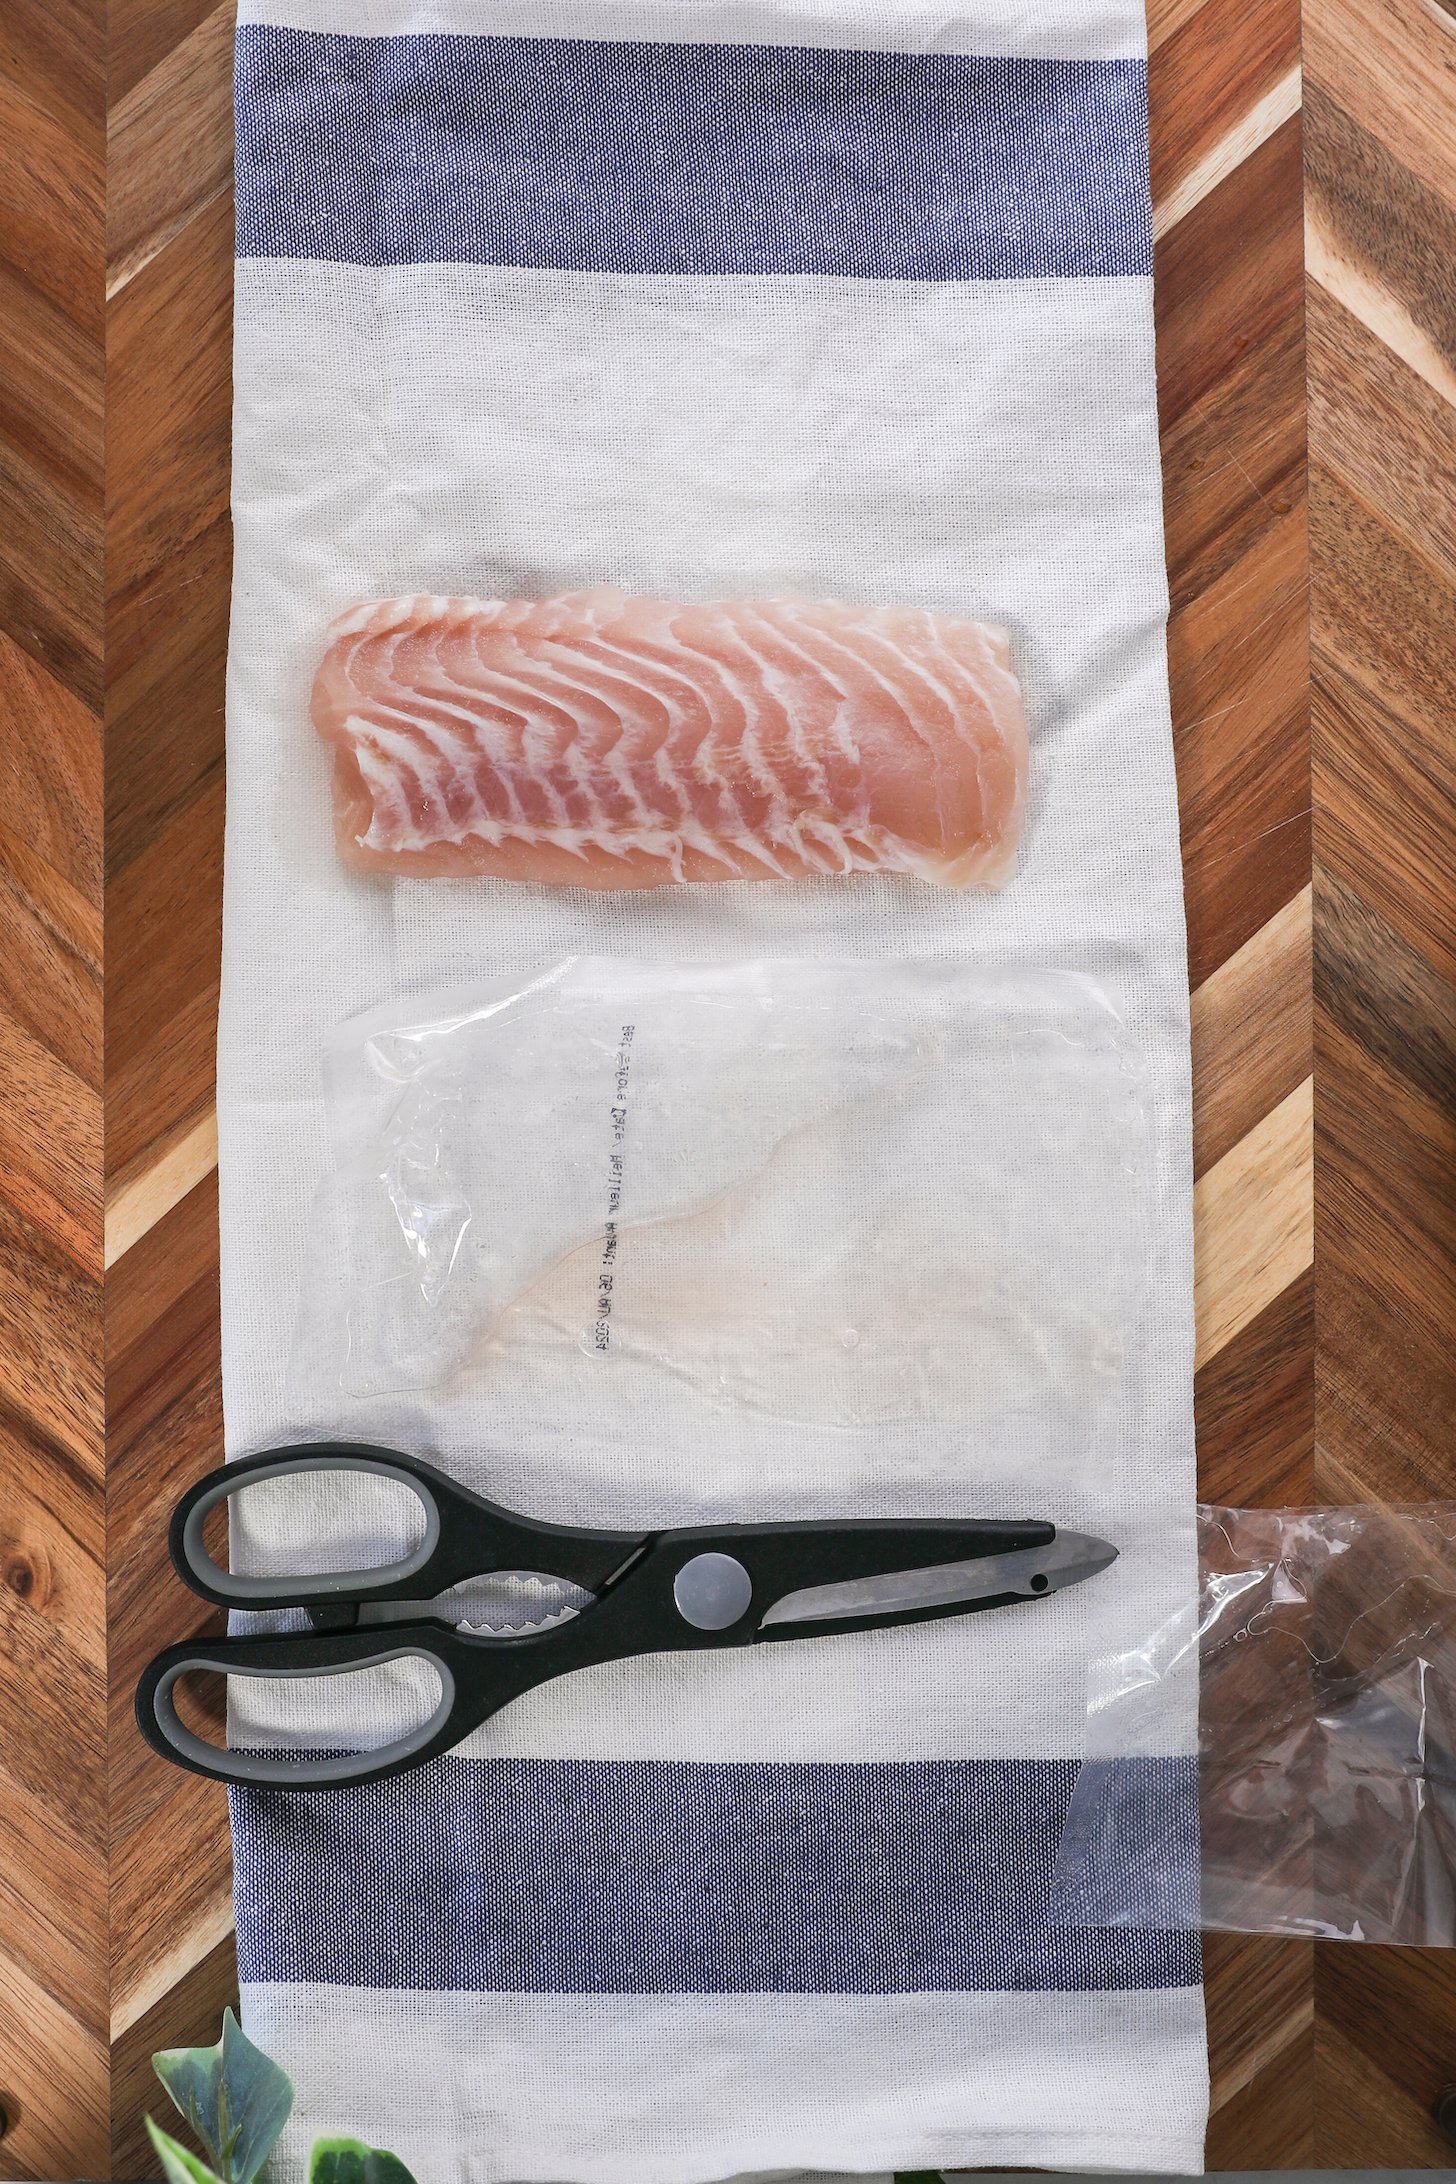 A white fish fillet on a t-towel with a pair of black scissors next to it.